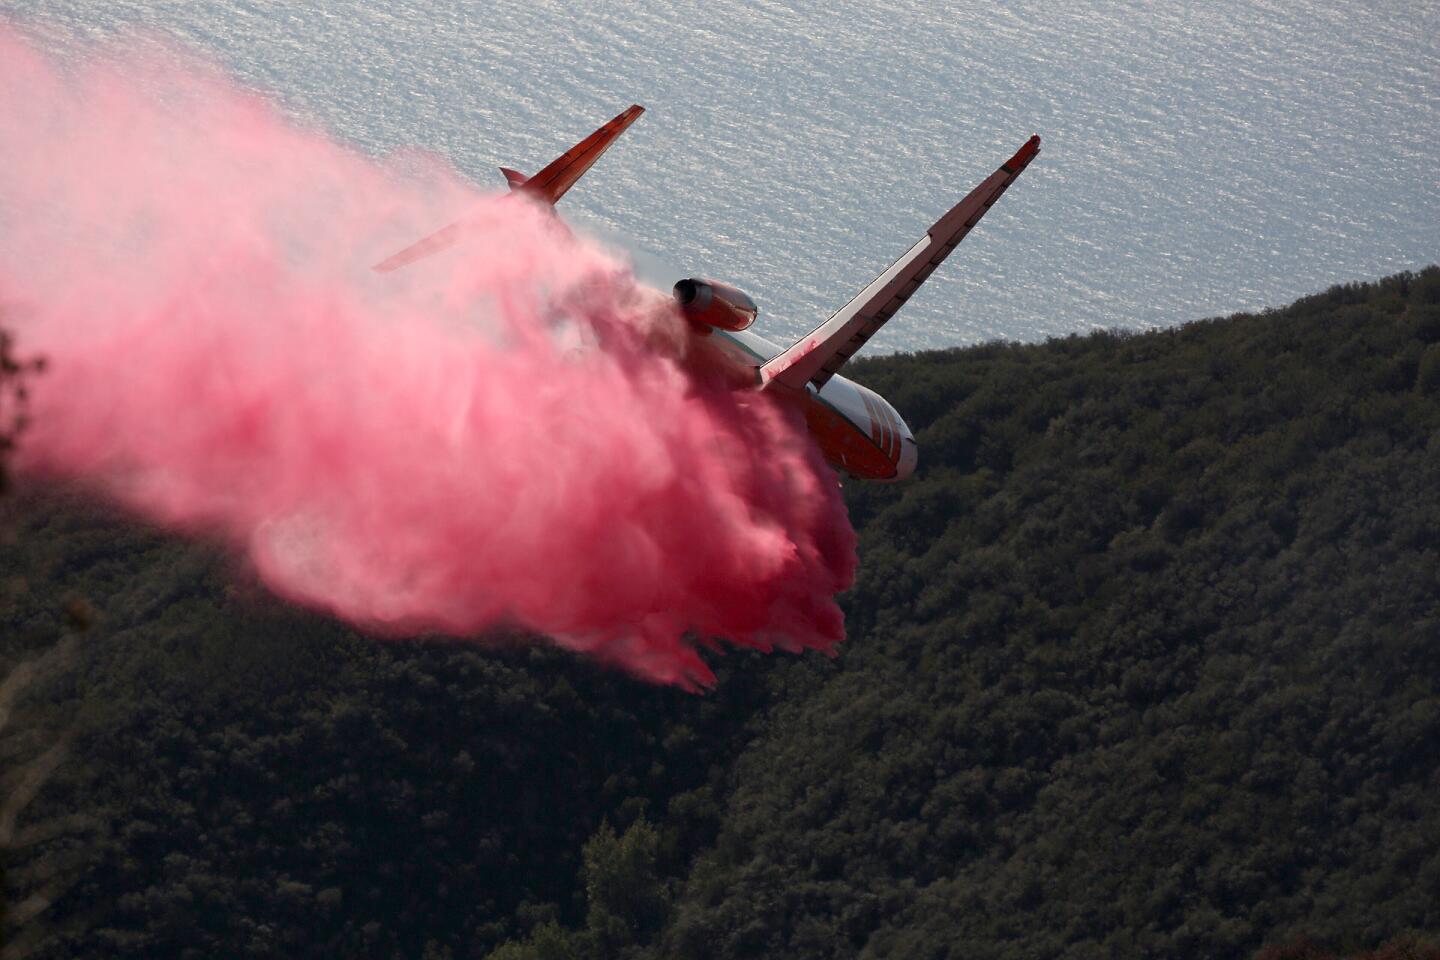 An aerial tanker drops fire retardant on a brush fire that broke out in the area of Montecito Peak near Santa Barbara on Thursday.